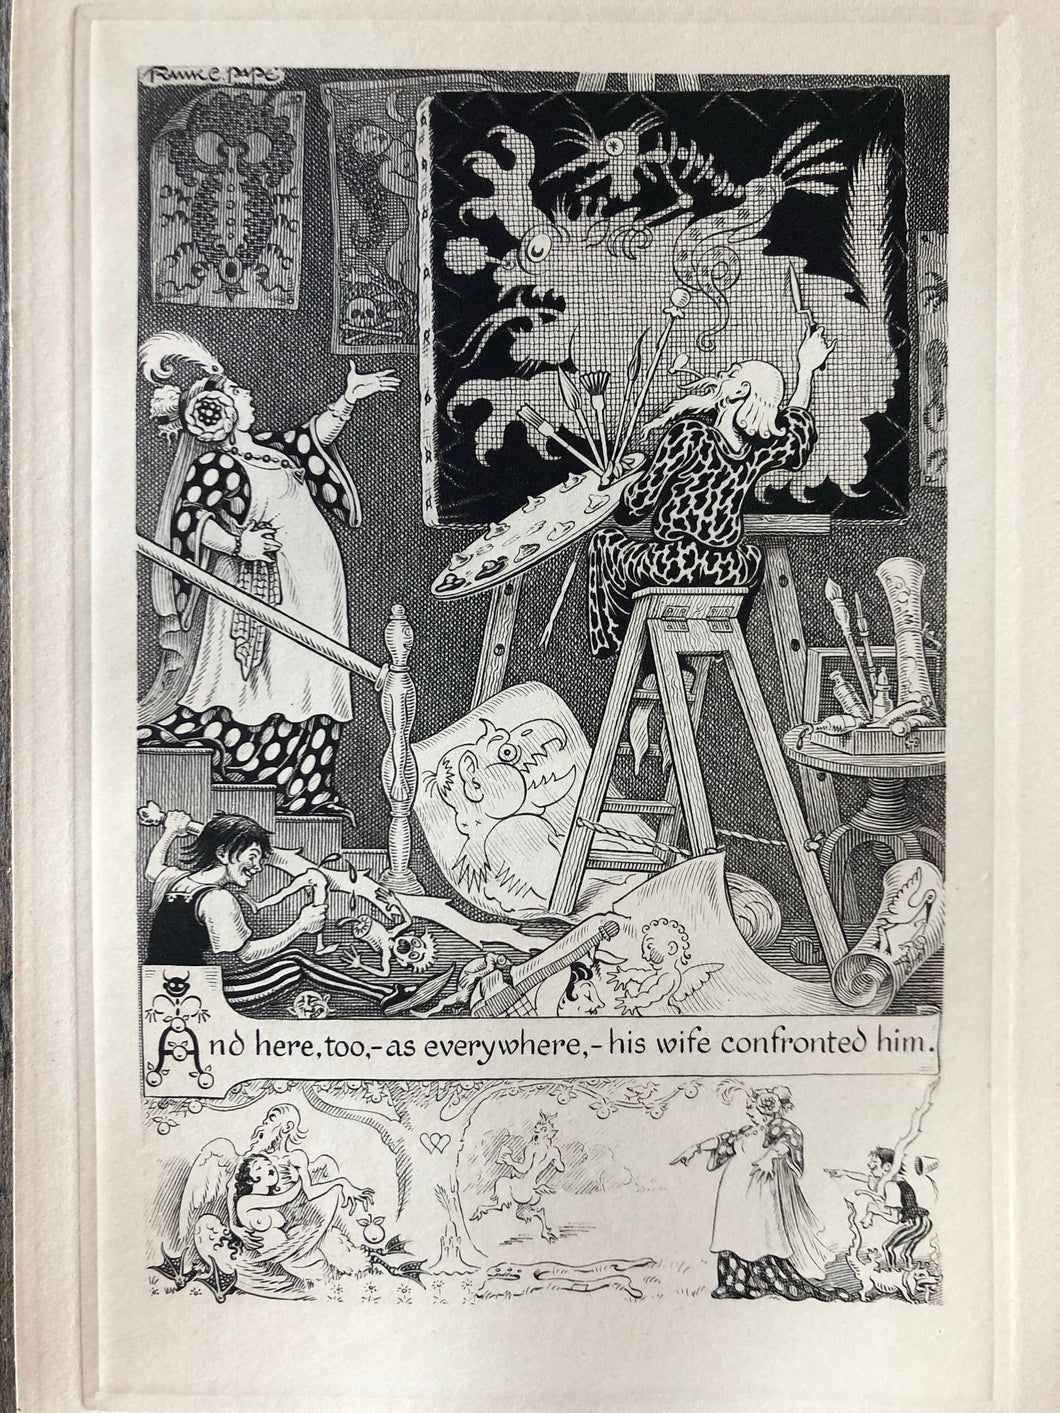 Print by Frank C. Pape from The Silver Stallion: A Comedy of Redemption by James Branch Cabell